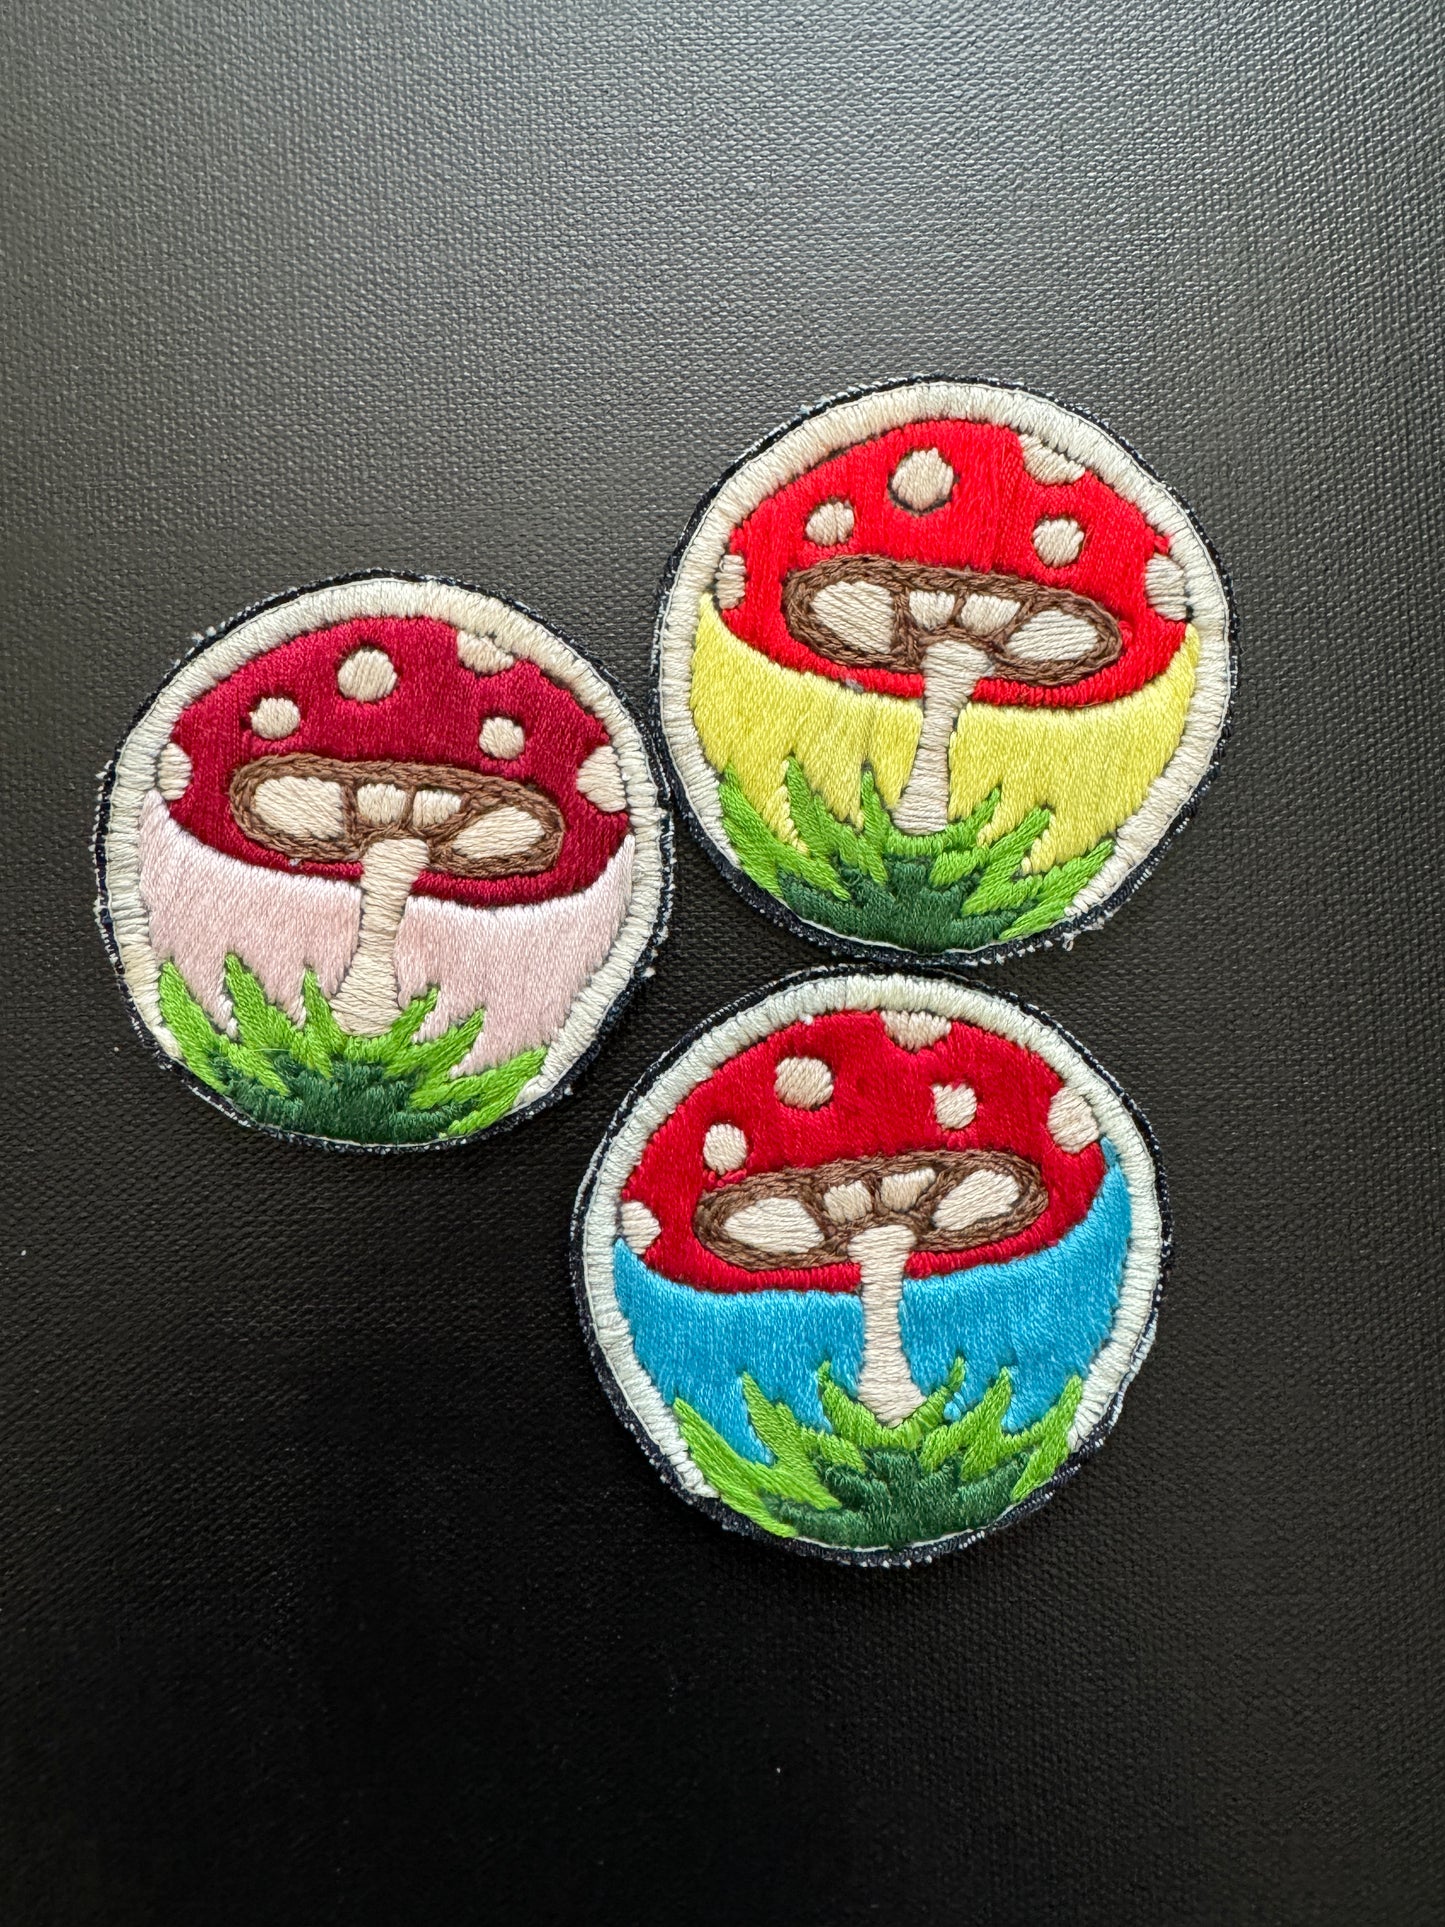 Shroom embroidery patch